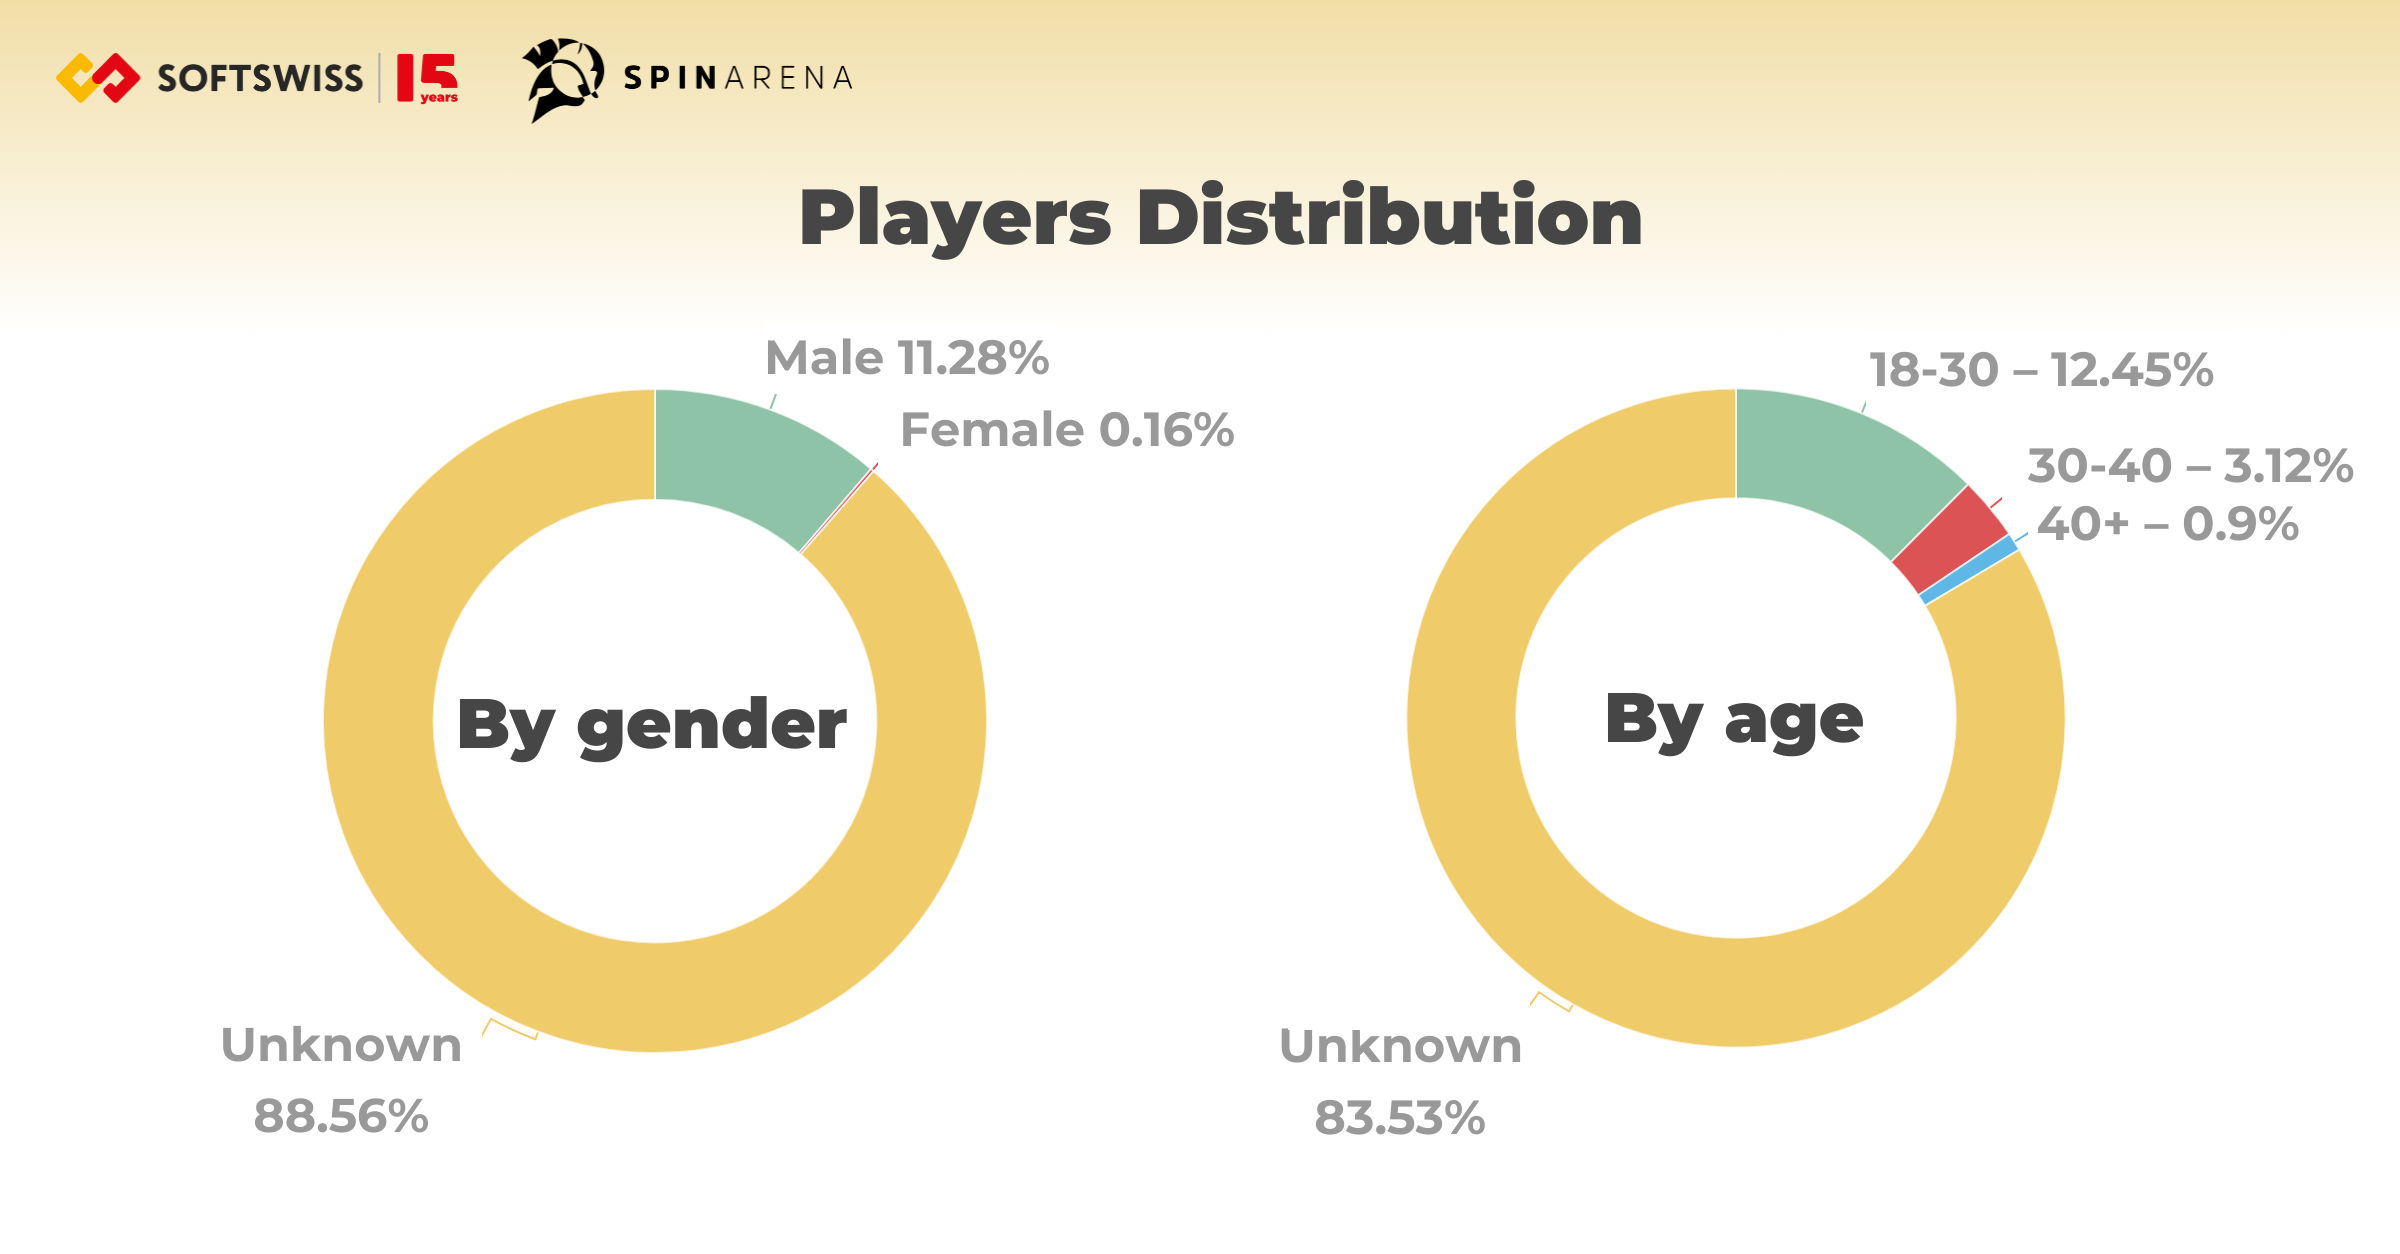 Spin arena player distribution